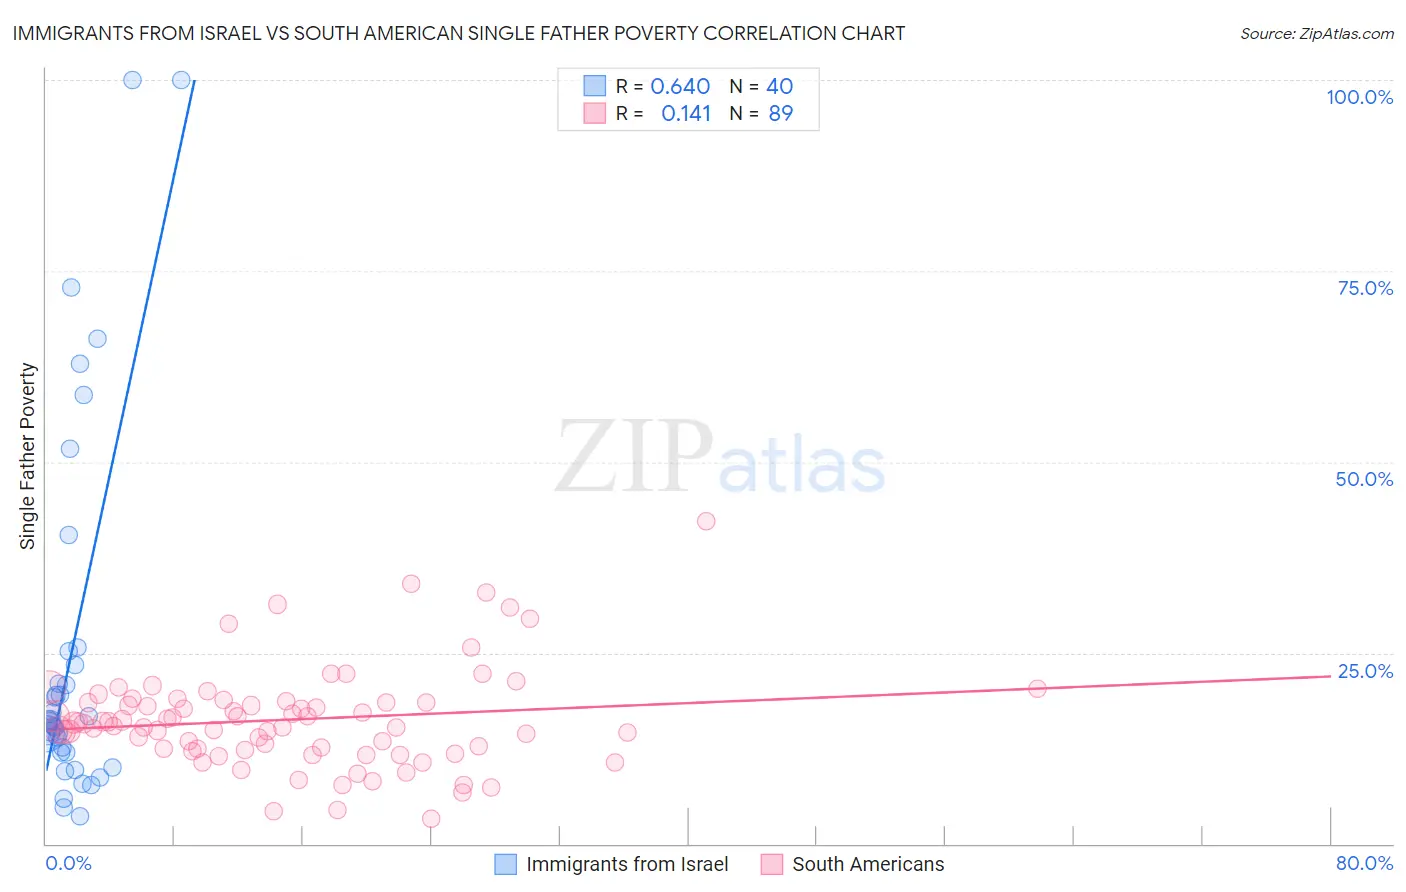 Immigrants from Israel vs South American Single Father Poverty